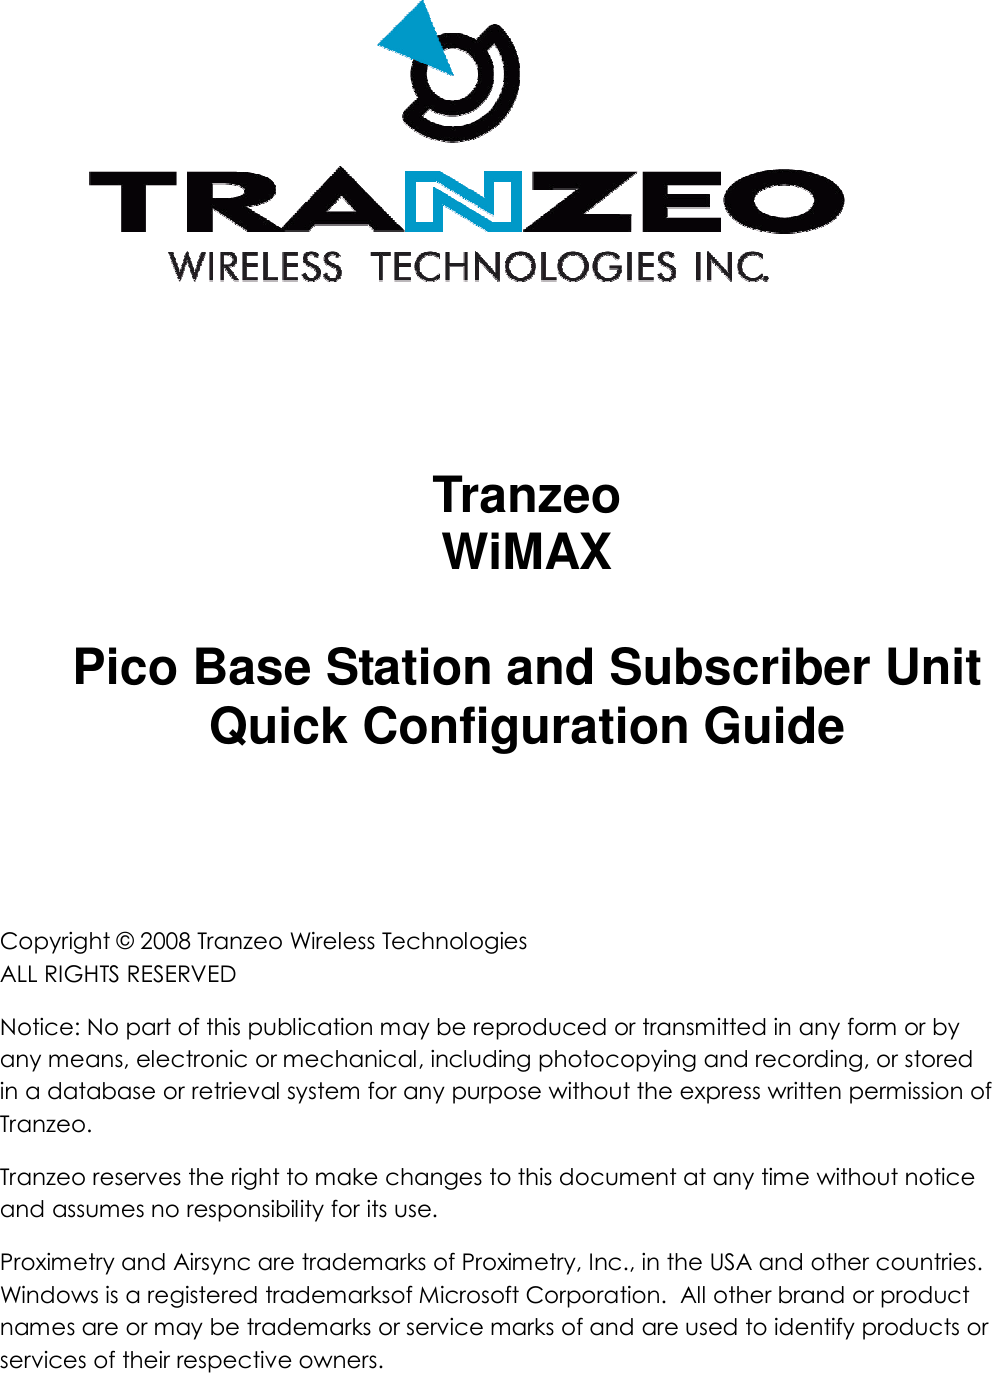  i  AirSync 2.2 Quick Configuration Guide – Tranzeo pBS                       Tranzeo WiMAX  Pico Base Station and Subscriber Unit Quick Configuration Guide Copyright © 2008 Tranzeo Wireless Technologies ALL RIGHTS RESERVED Notice: No part of this publication may be reproduced or transmitted in any form or by any means, electronic or mechanical, including photocopying and recording, or stored in a database or retrieval system for any purpose without the express written permission of Tranzeo. Tranzeo reserves the right to make changes to this document at any time without notice and assumes no responsibility for its use. Proximetry and Airsync are trademarks of Proximetry, Inc., in the USA and other countries. Windows is a registered trademarksof Microsoft Corporation.  All other brand or product names are or may be trademarks or service marks of and are used to identify products or services of their respective owners. 